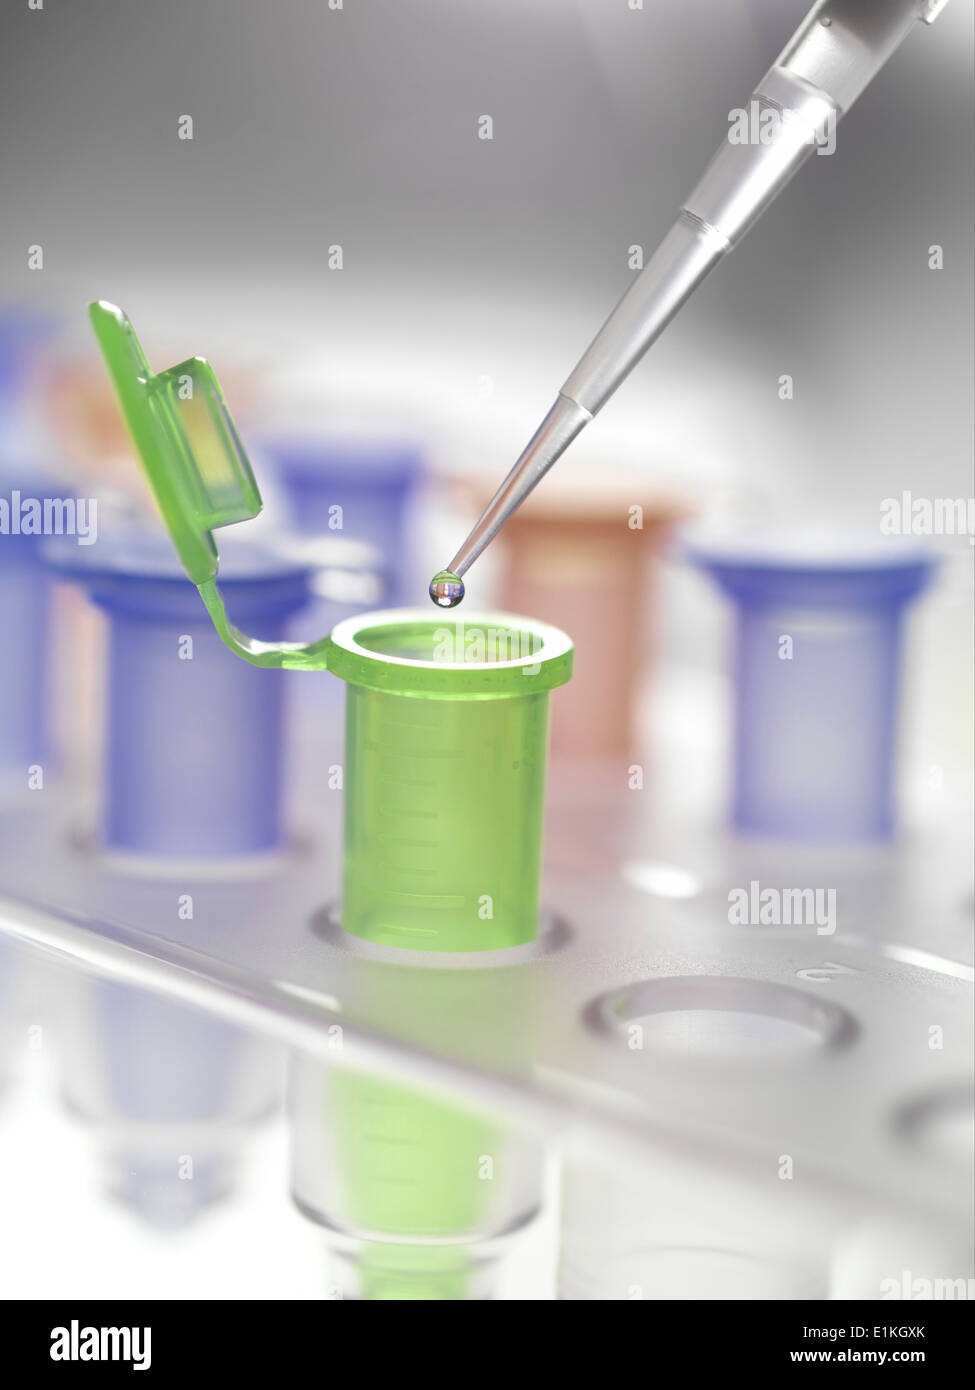 Pipette dropping a solution into a vial used for storing liquid during chemical or biological research. Stock Photo